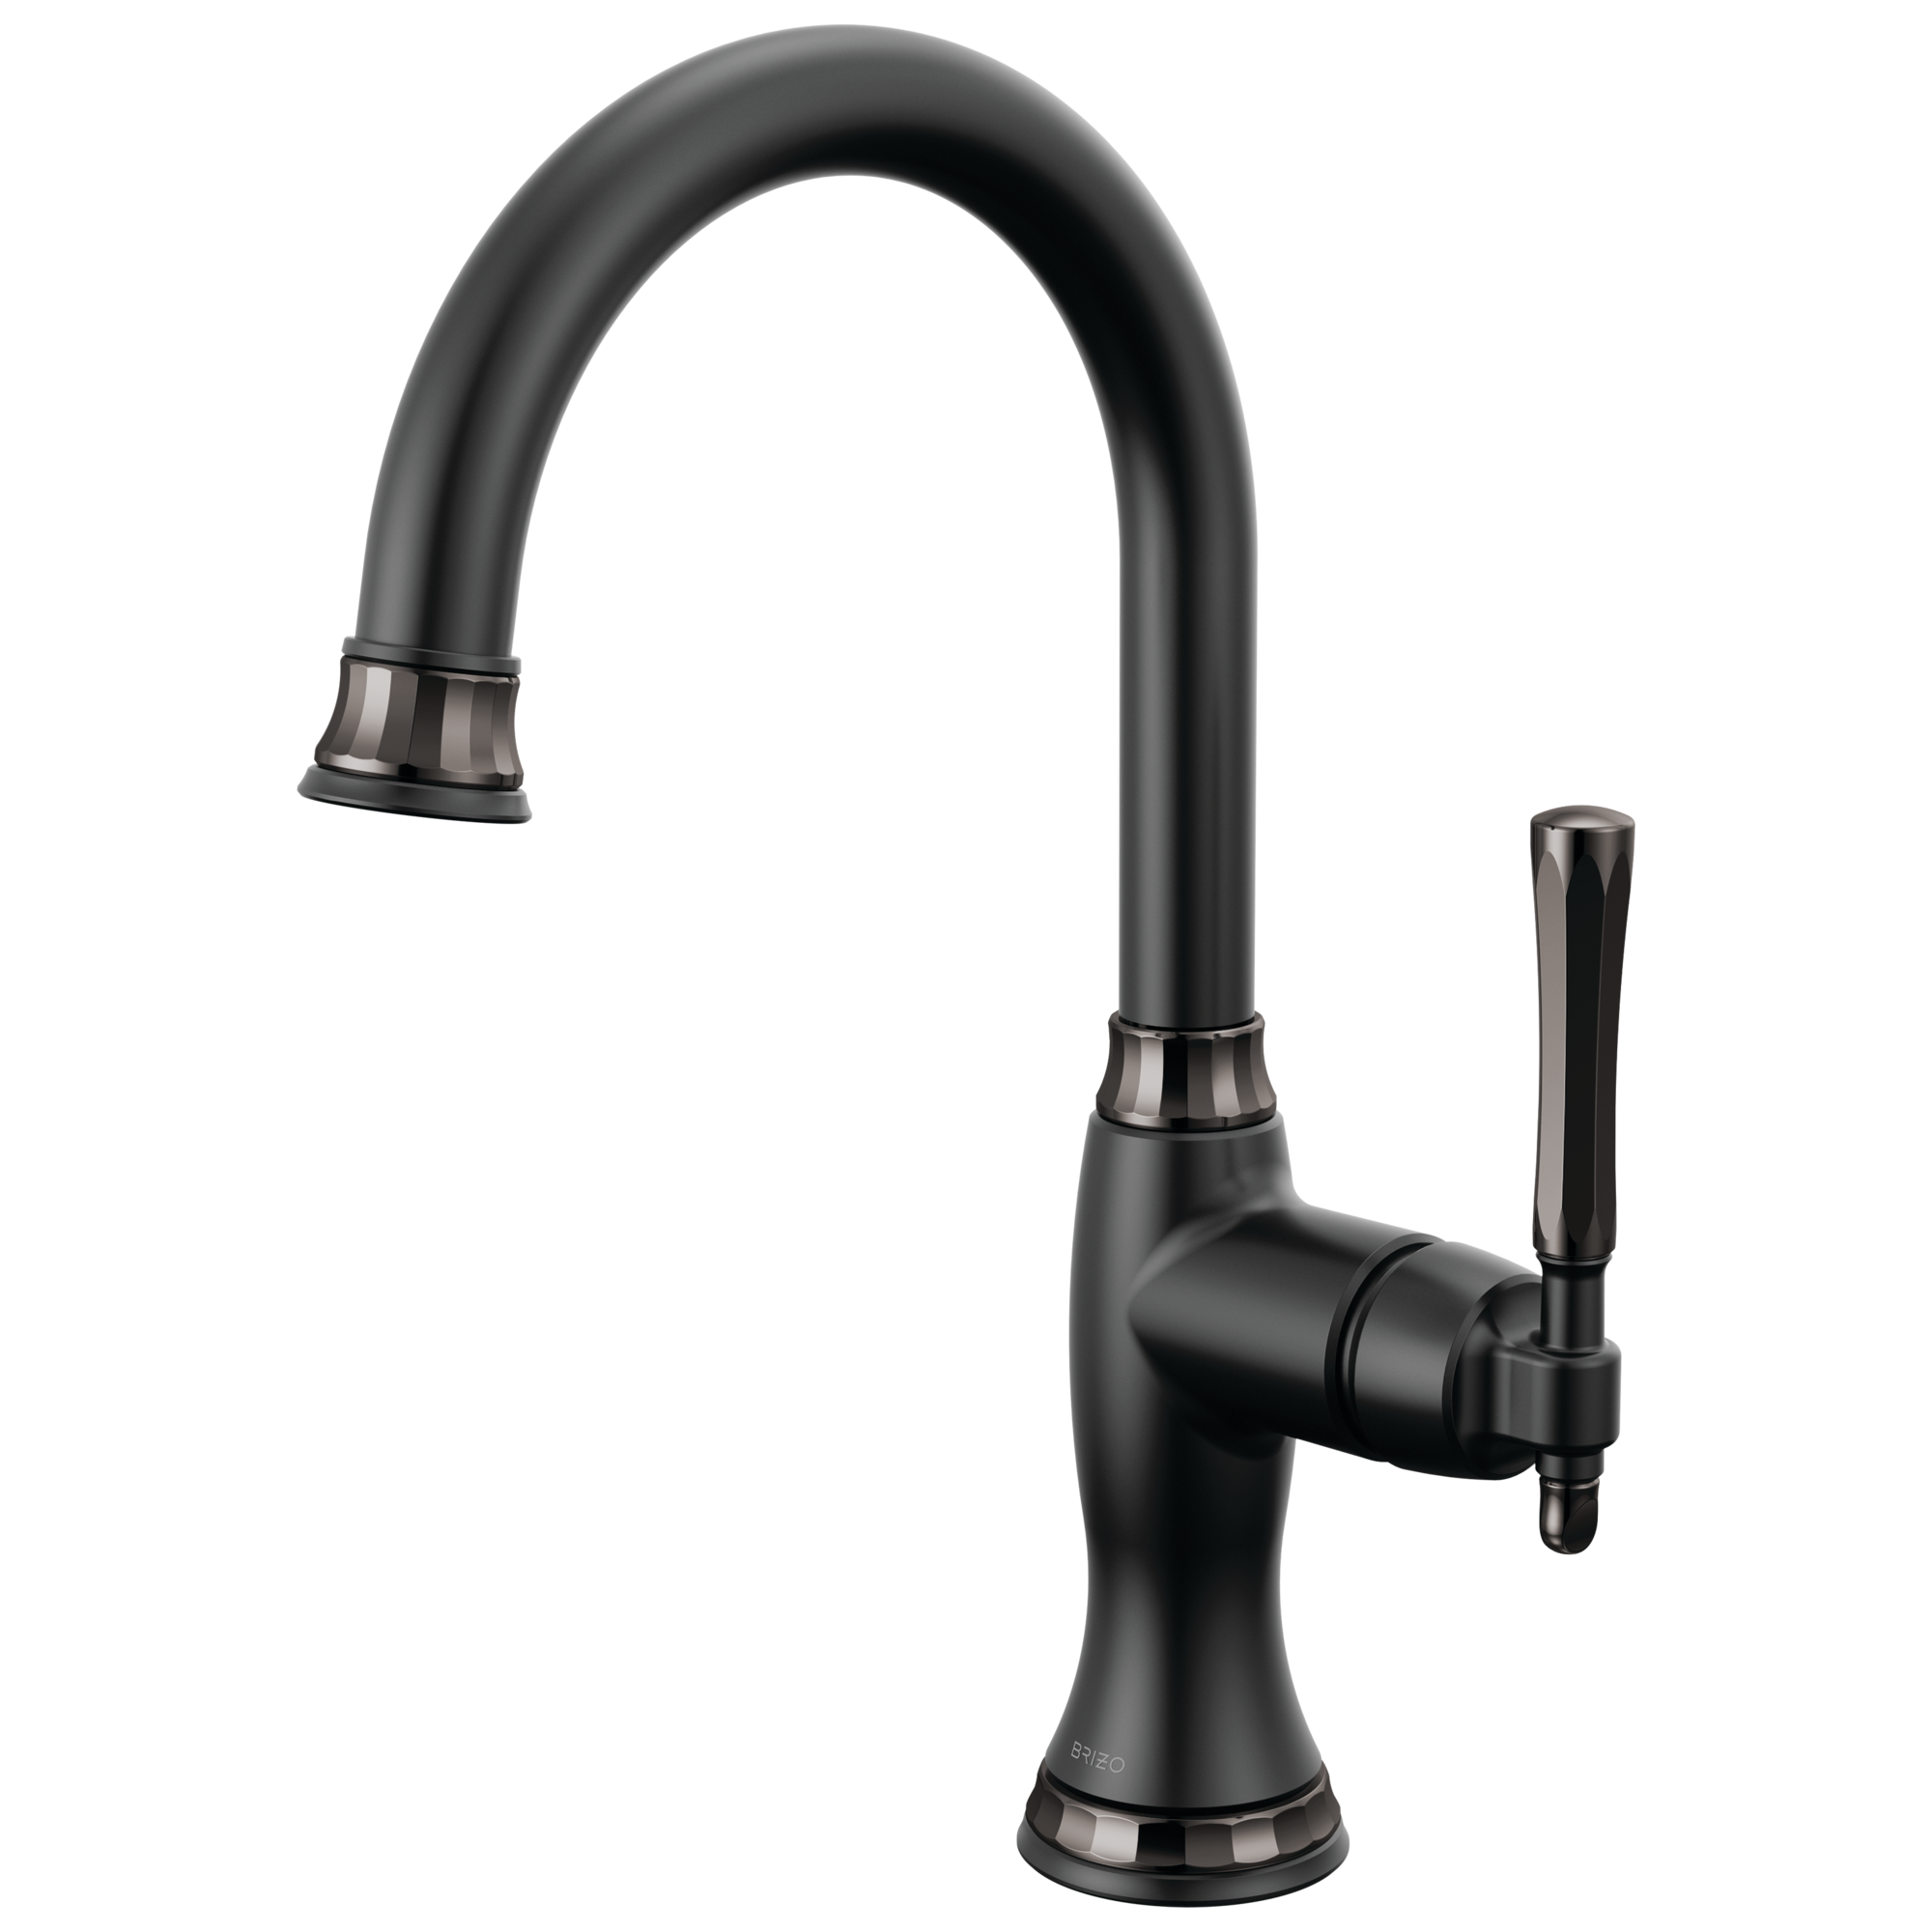 Brizo The Tulham Kitchen Collection by Brizo Bar Faucet